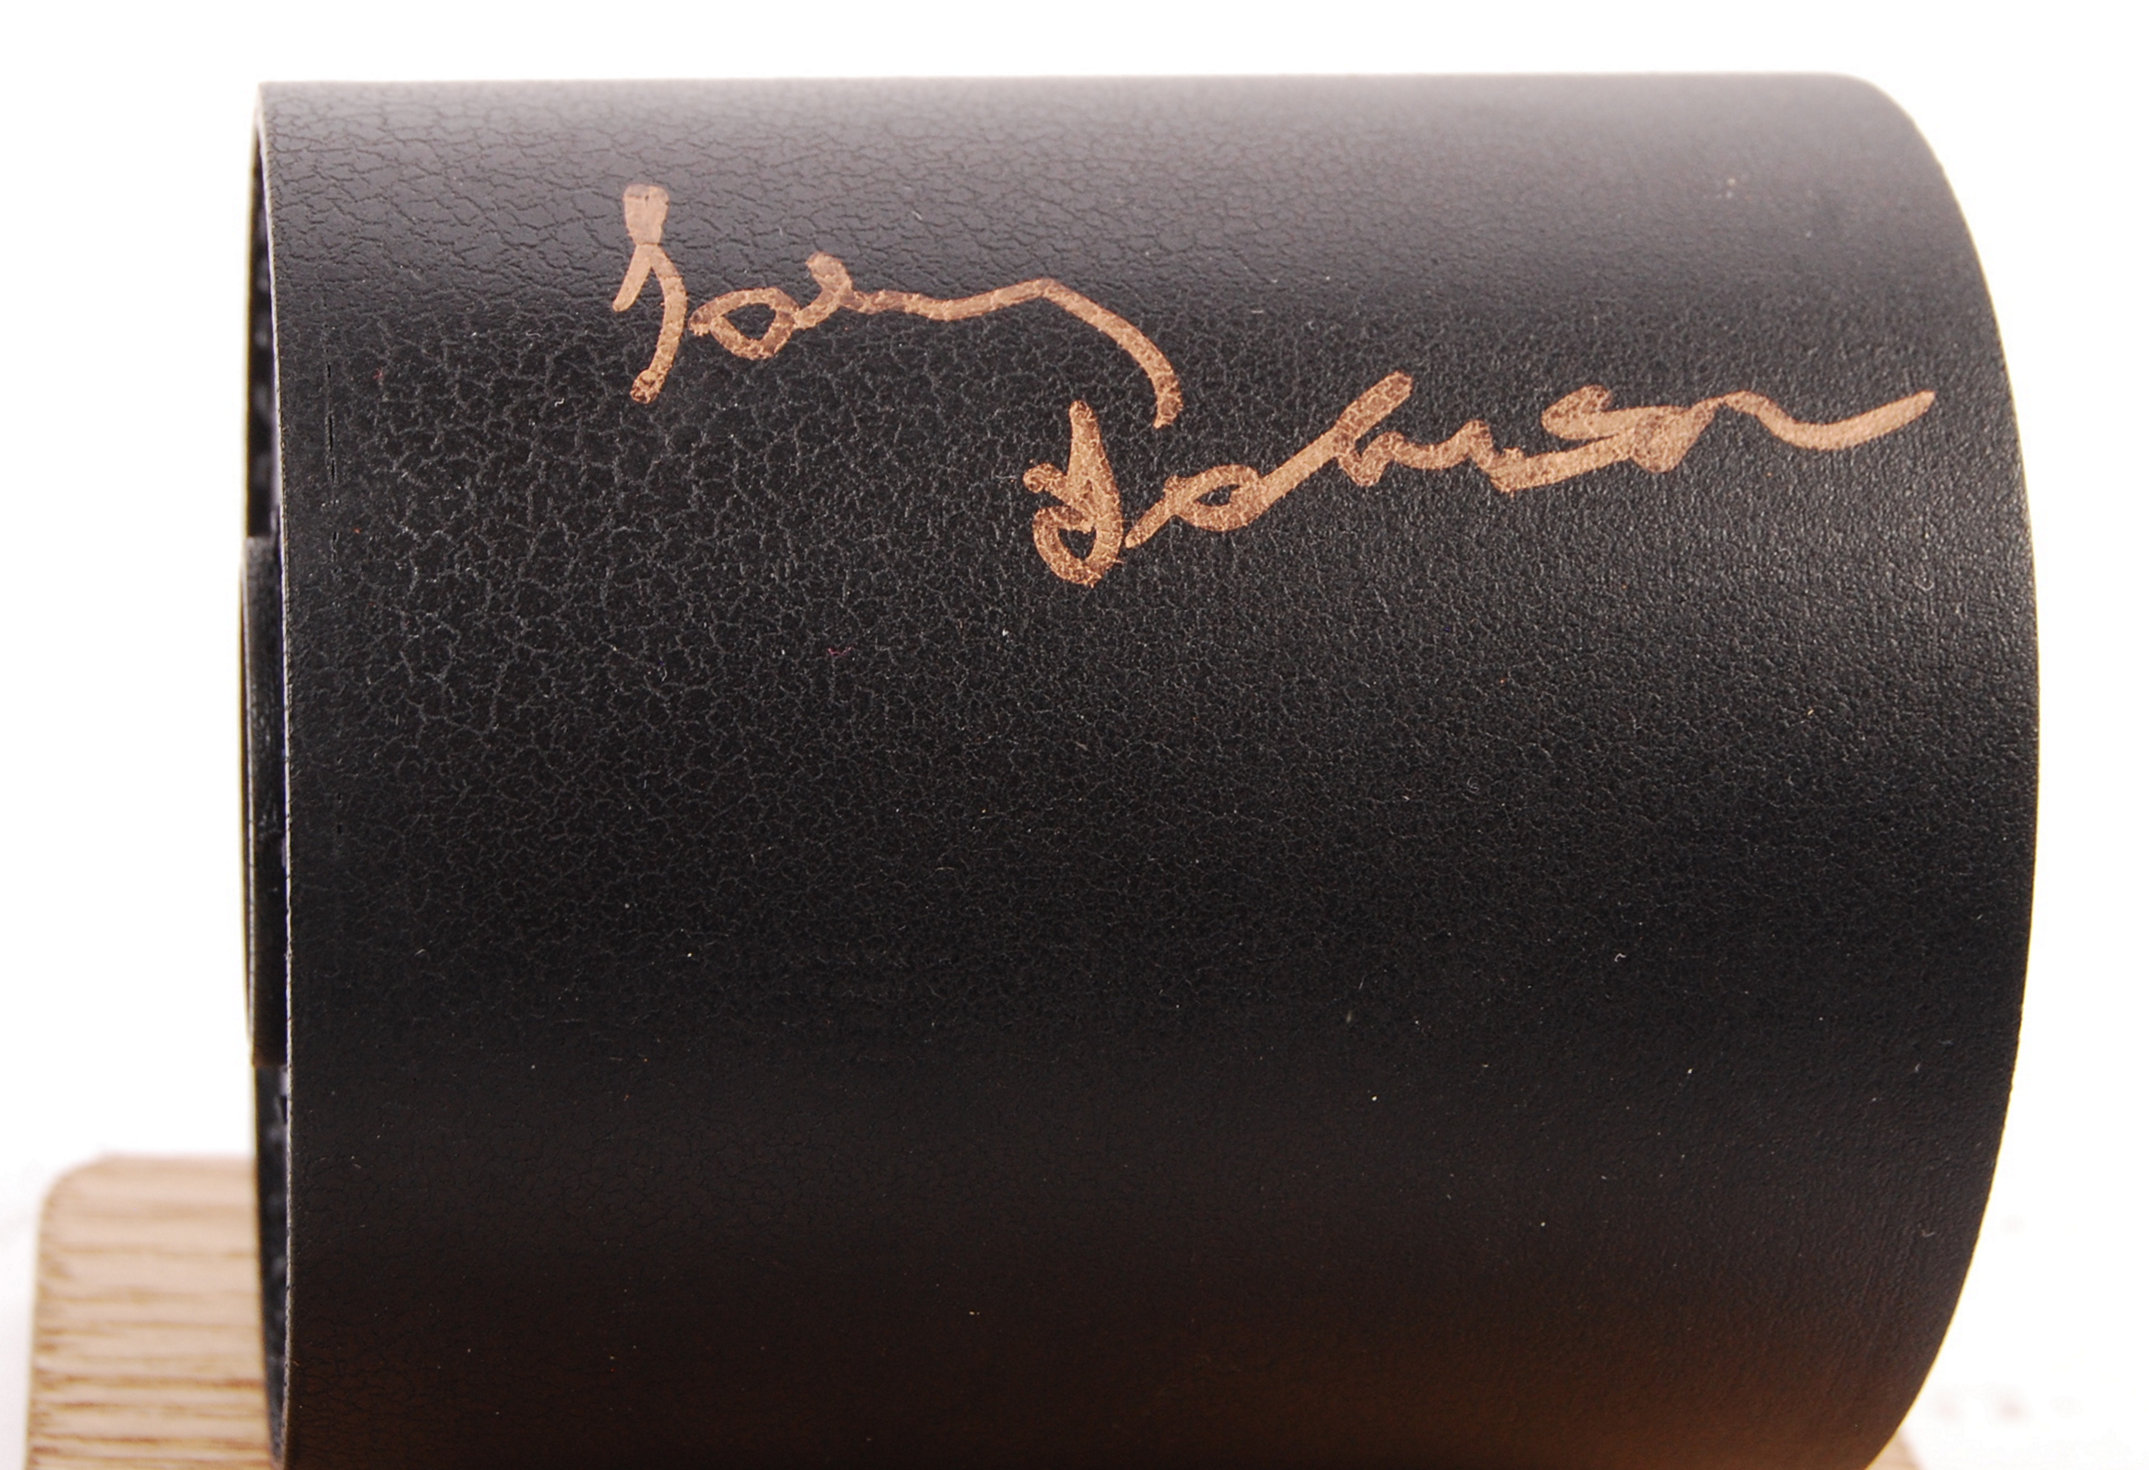 RARE DAMBUSTERS 'UPKEEP' BOUNCING BOMB SIGNED REPL - Image 3 of 3